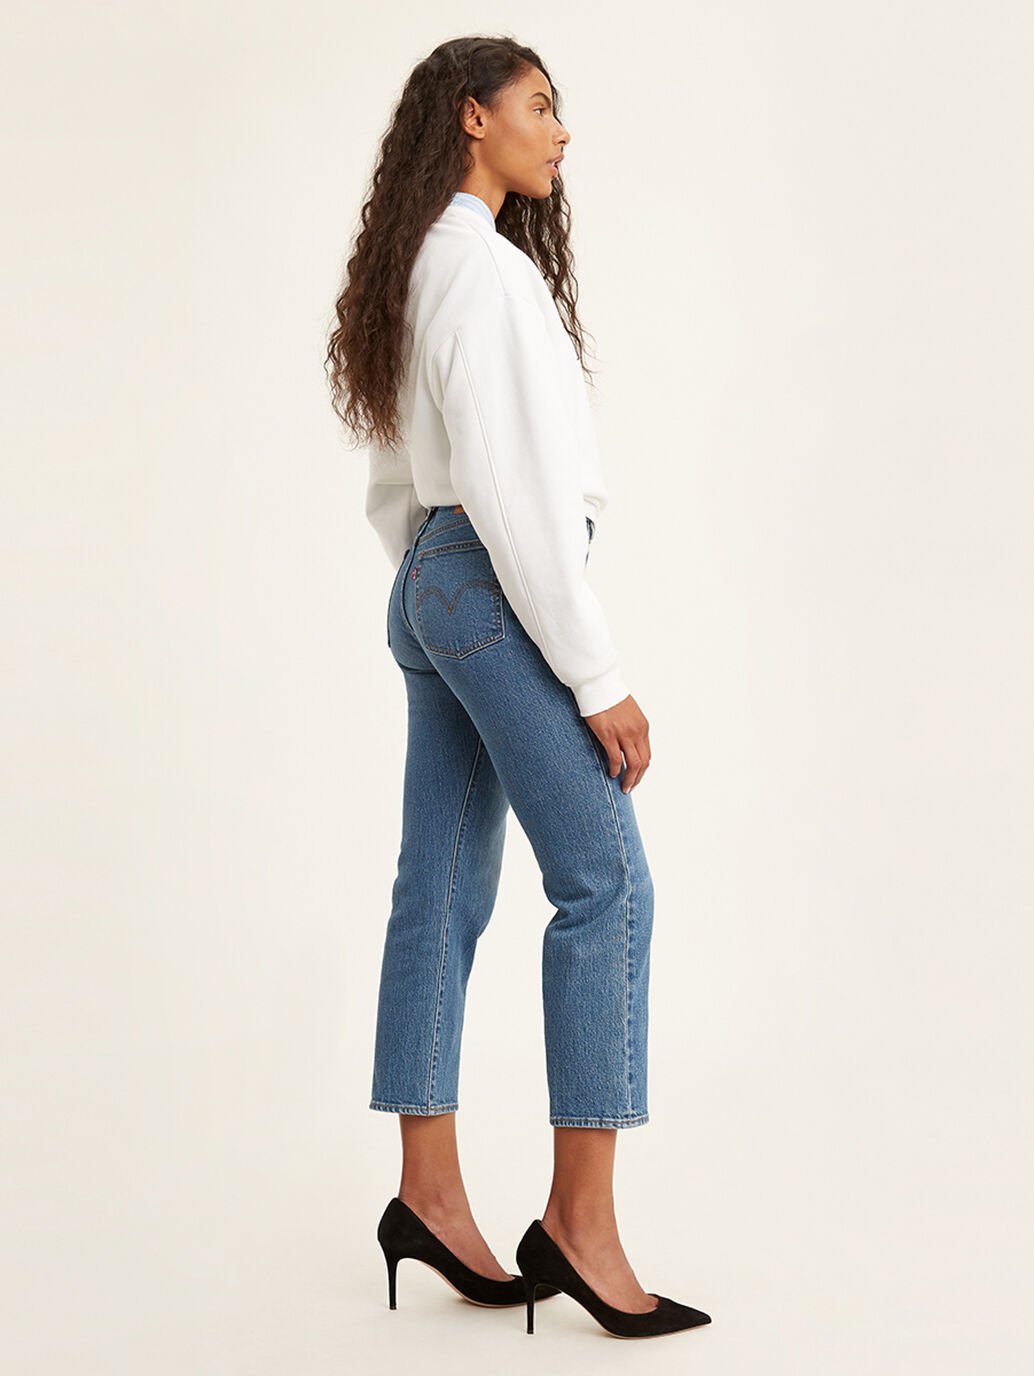 Levis Wedgie Straight Blue Jive